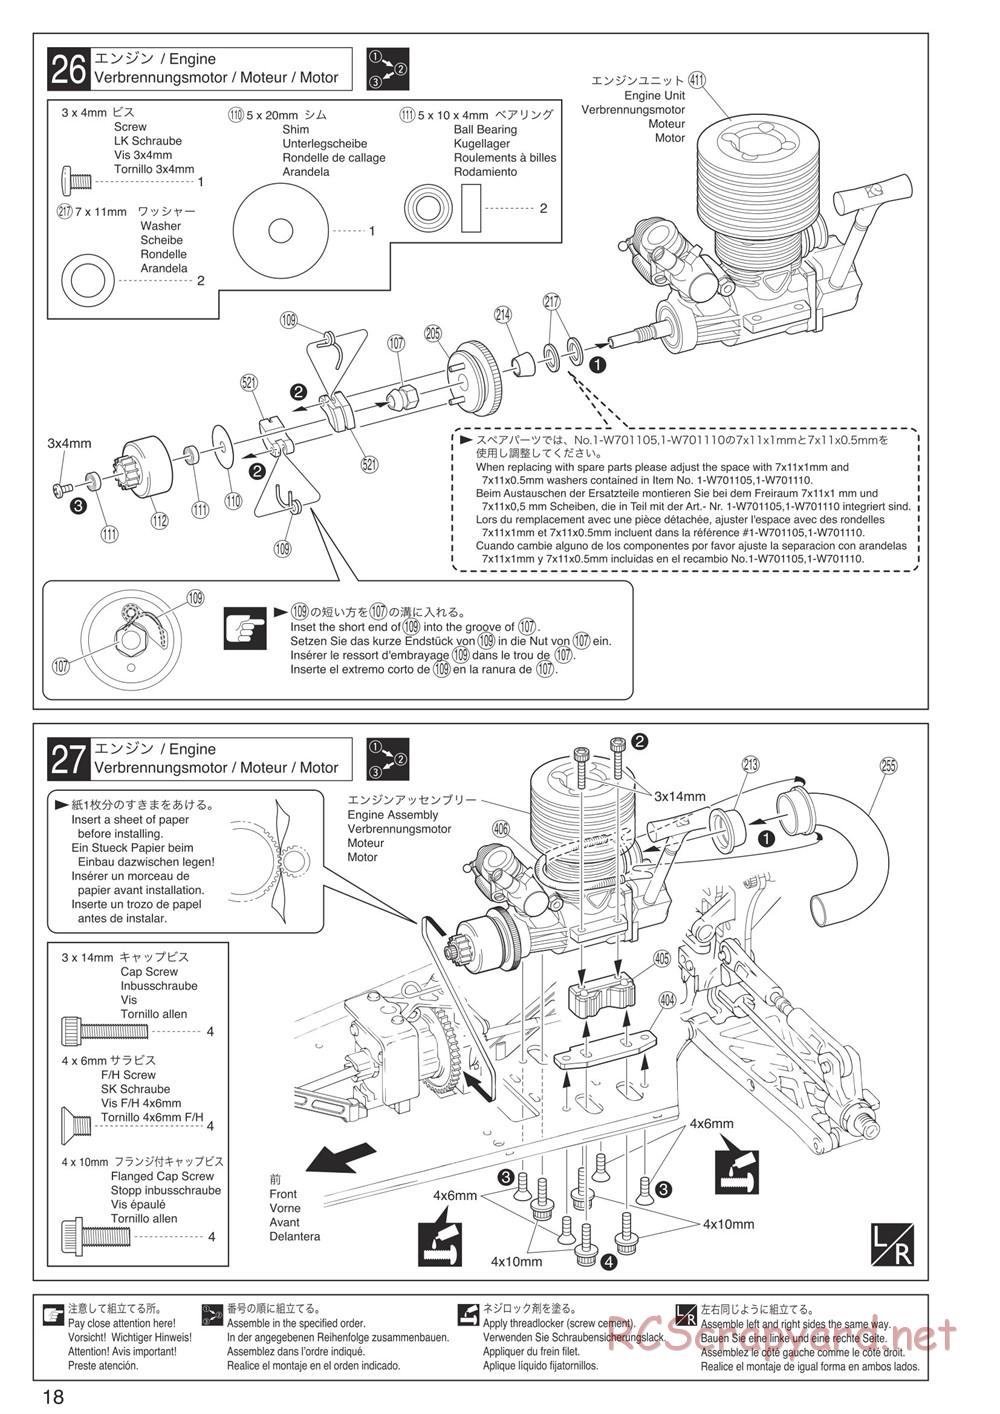 Kyosho - Inferno Neo 3.0 - Manual - Page 18